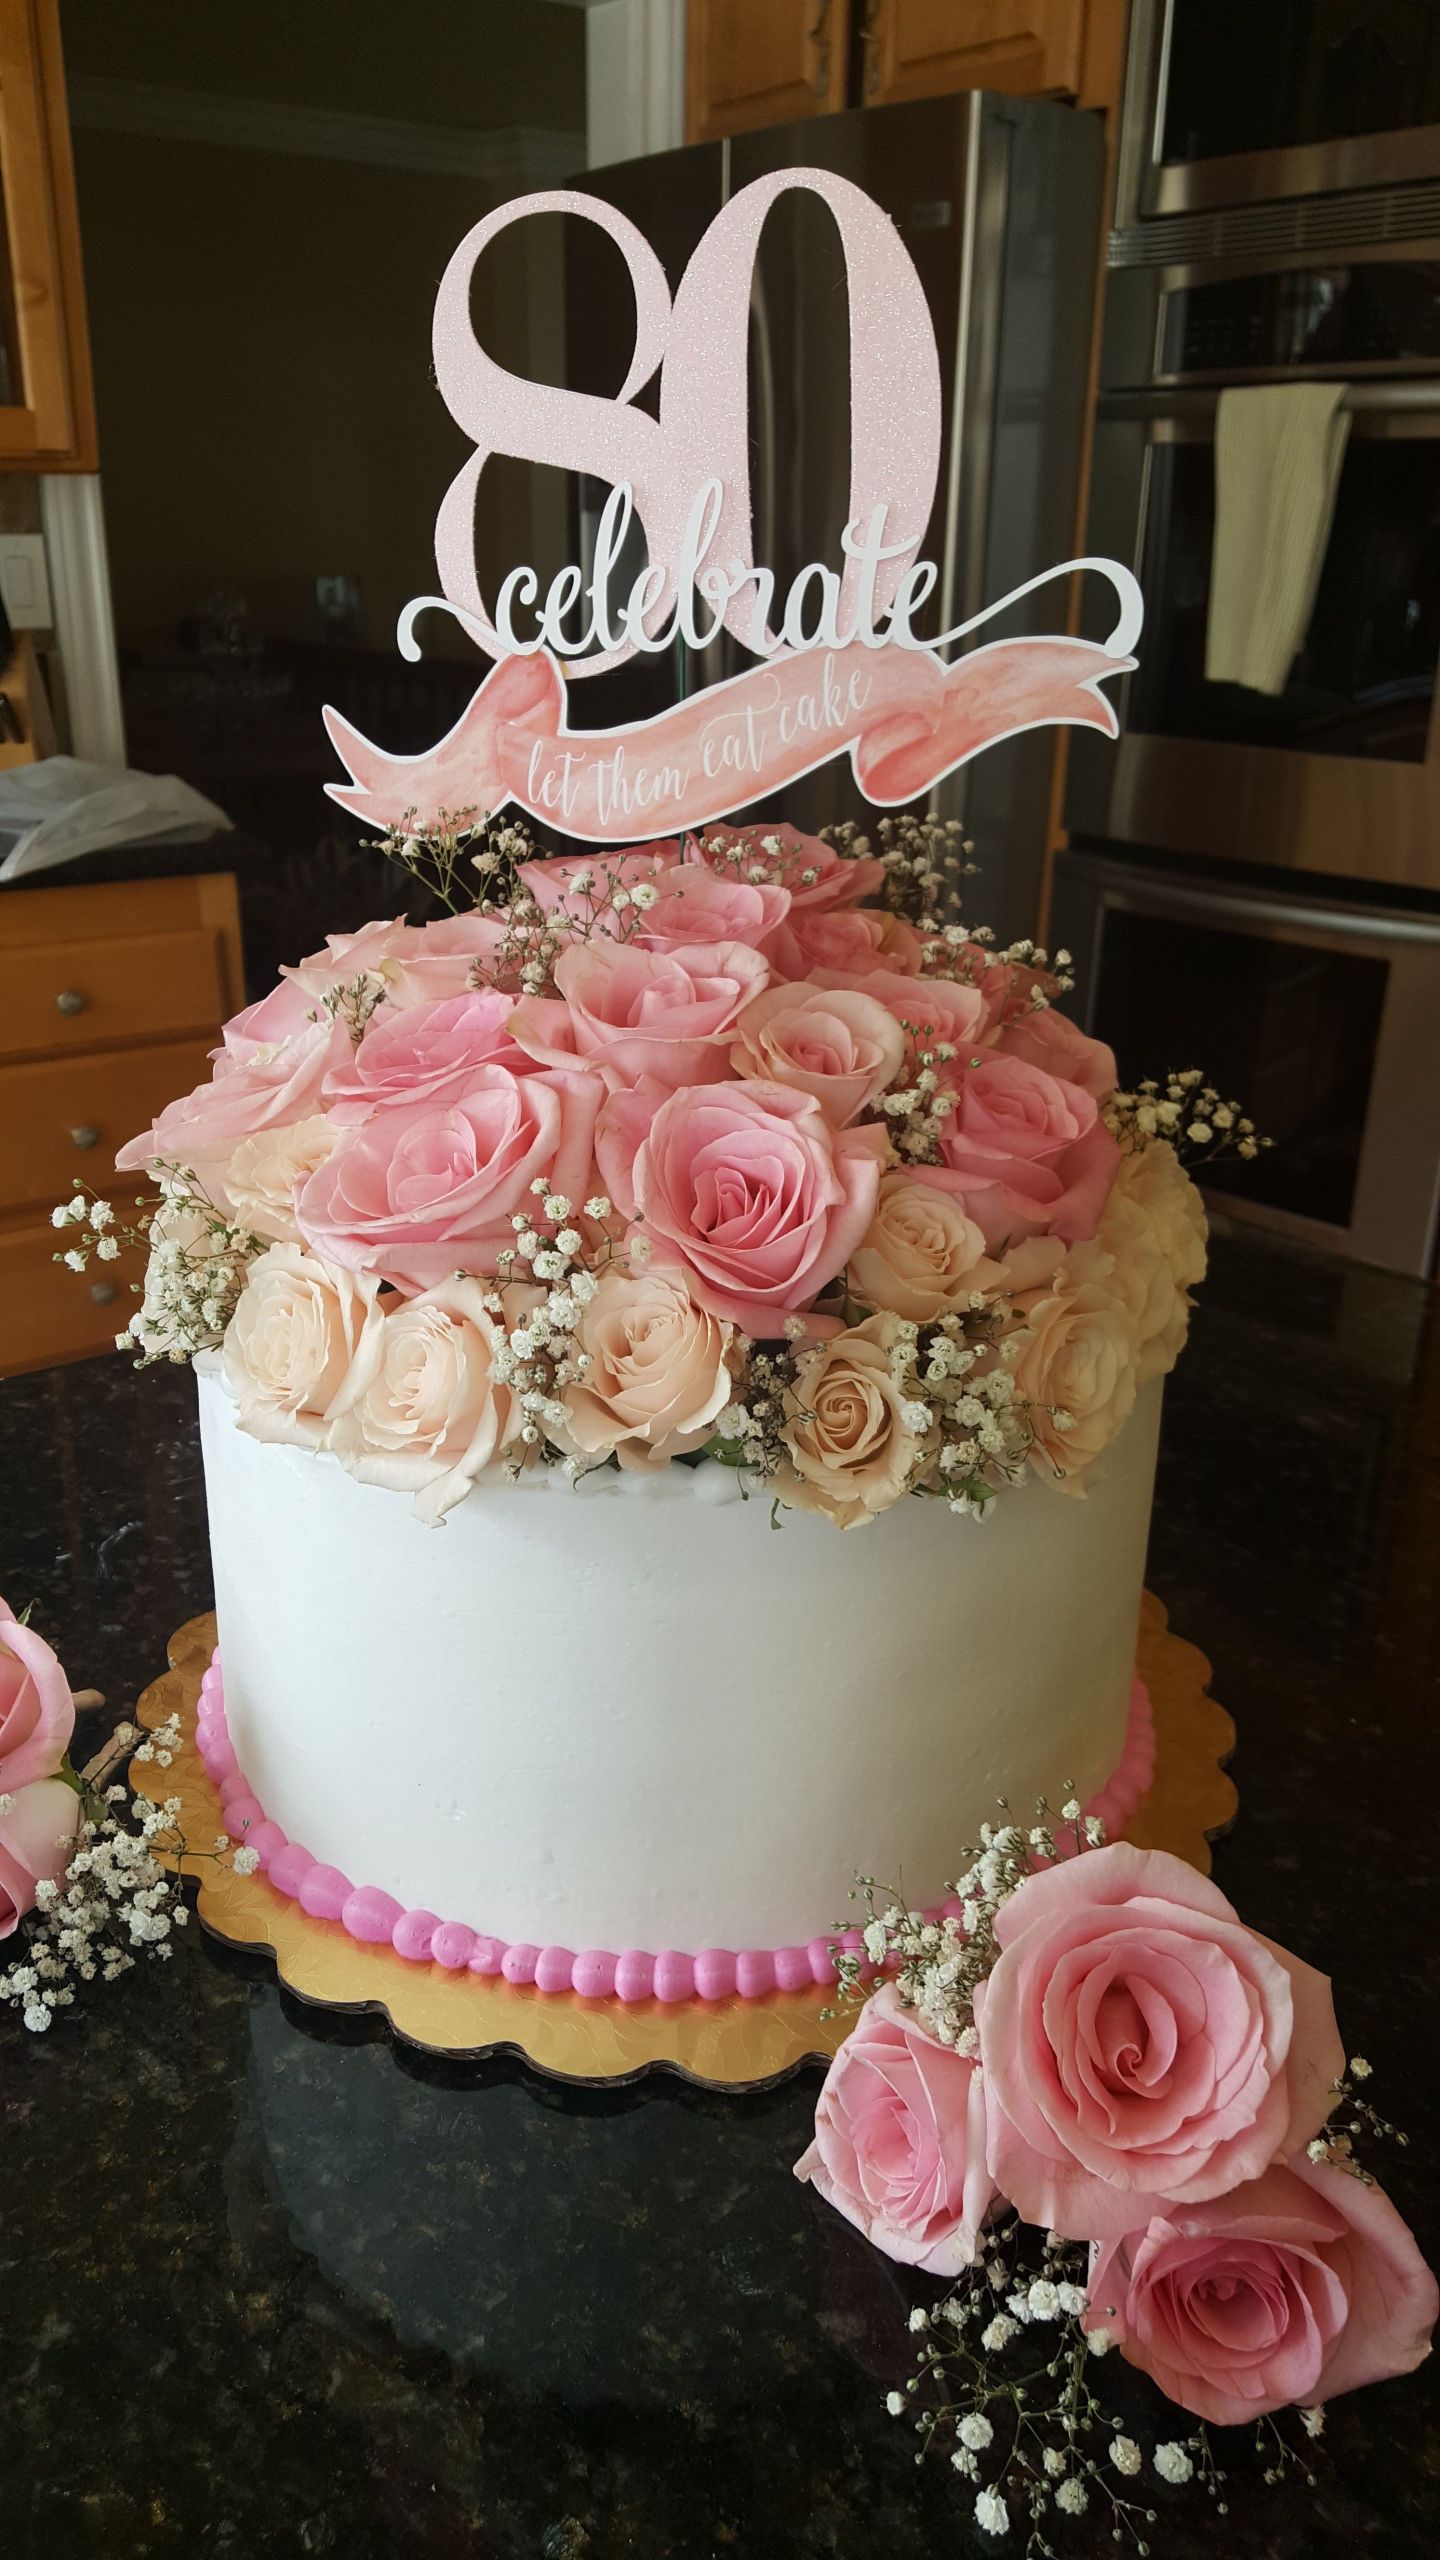 80th Birthday Cakes
 80th birthday cake with fresh flower topper in 2019